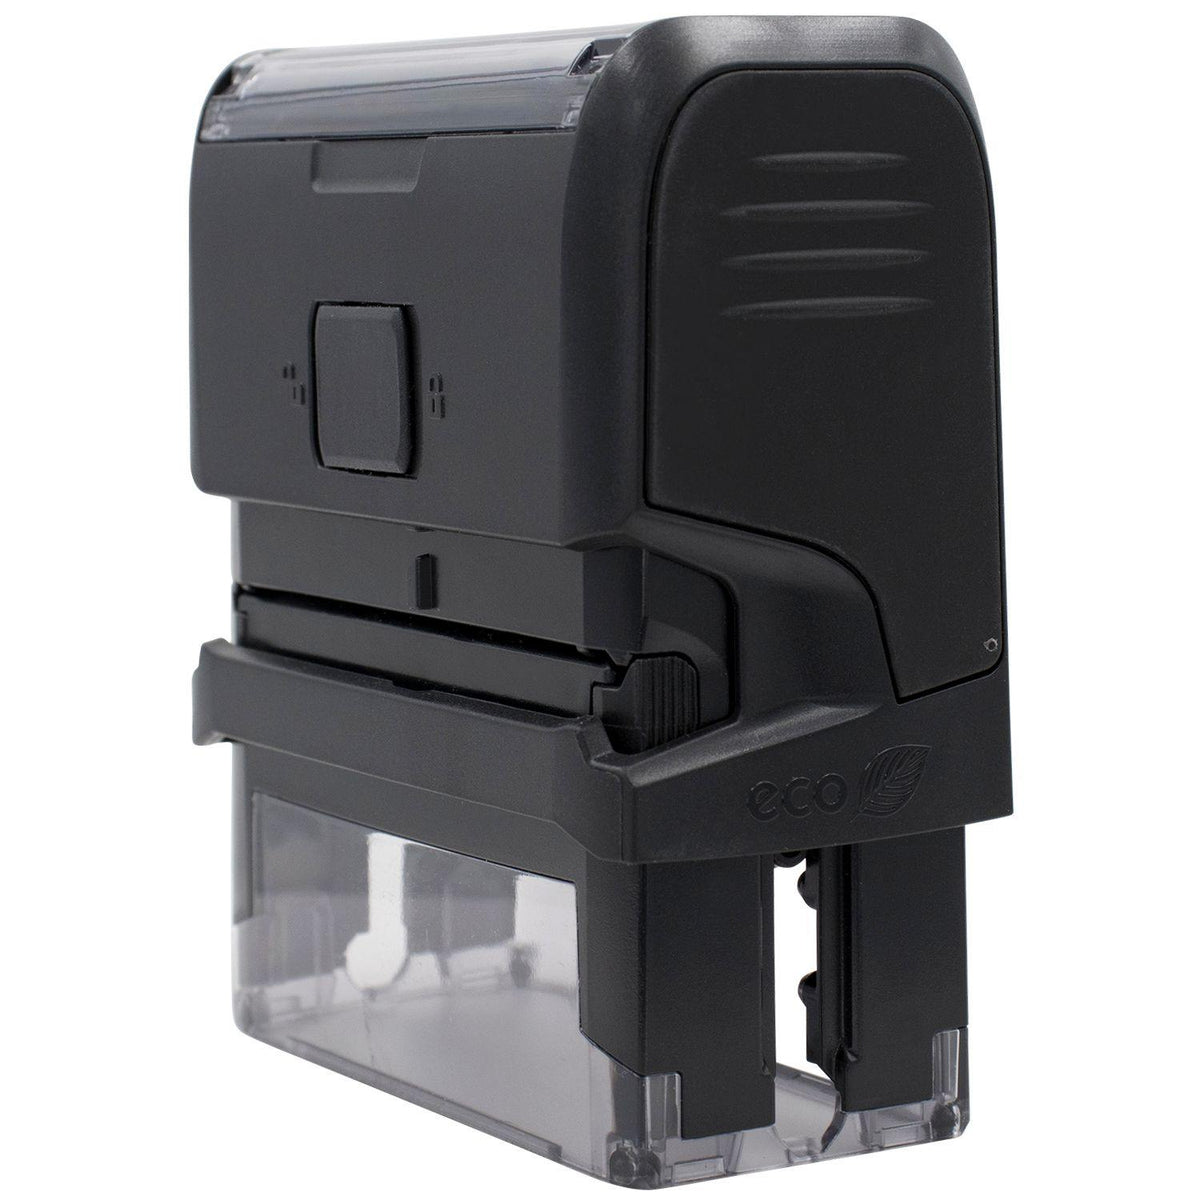 Self-Inking What Happened Stamp - Engineer Seal Stamps - Brand_Trodat, Impression Size_Small, Stamp Type_Self-Inking Stamp, Type of Use_Teacher